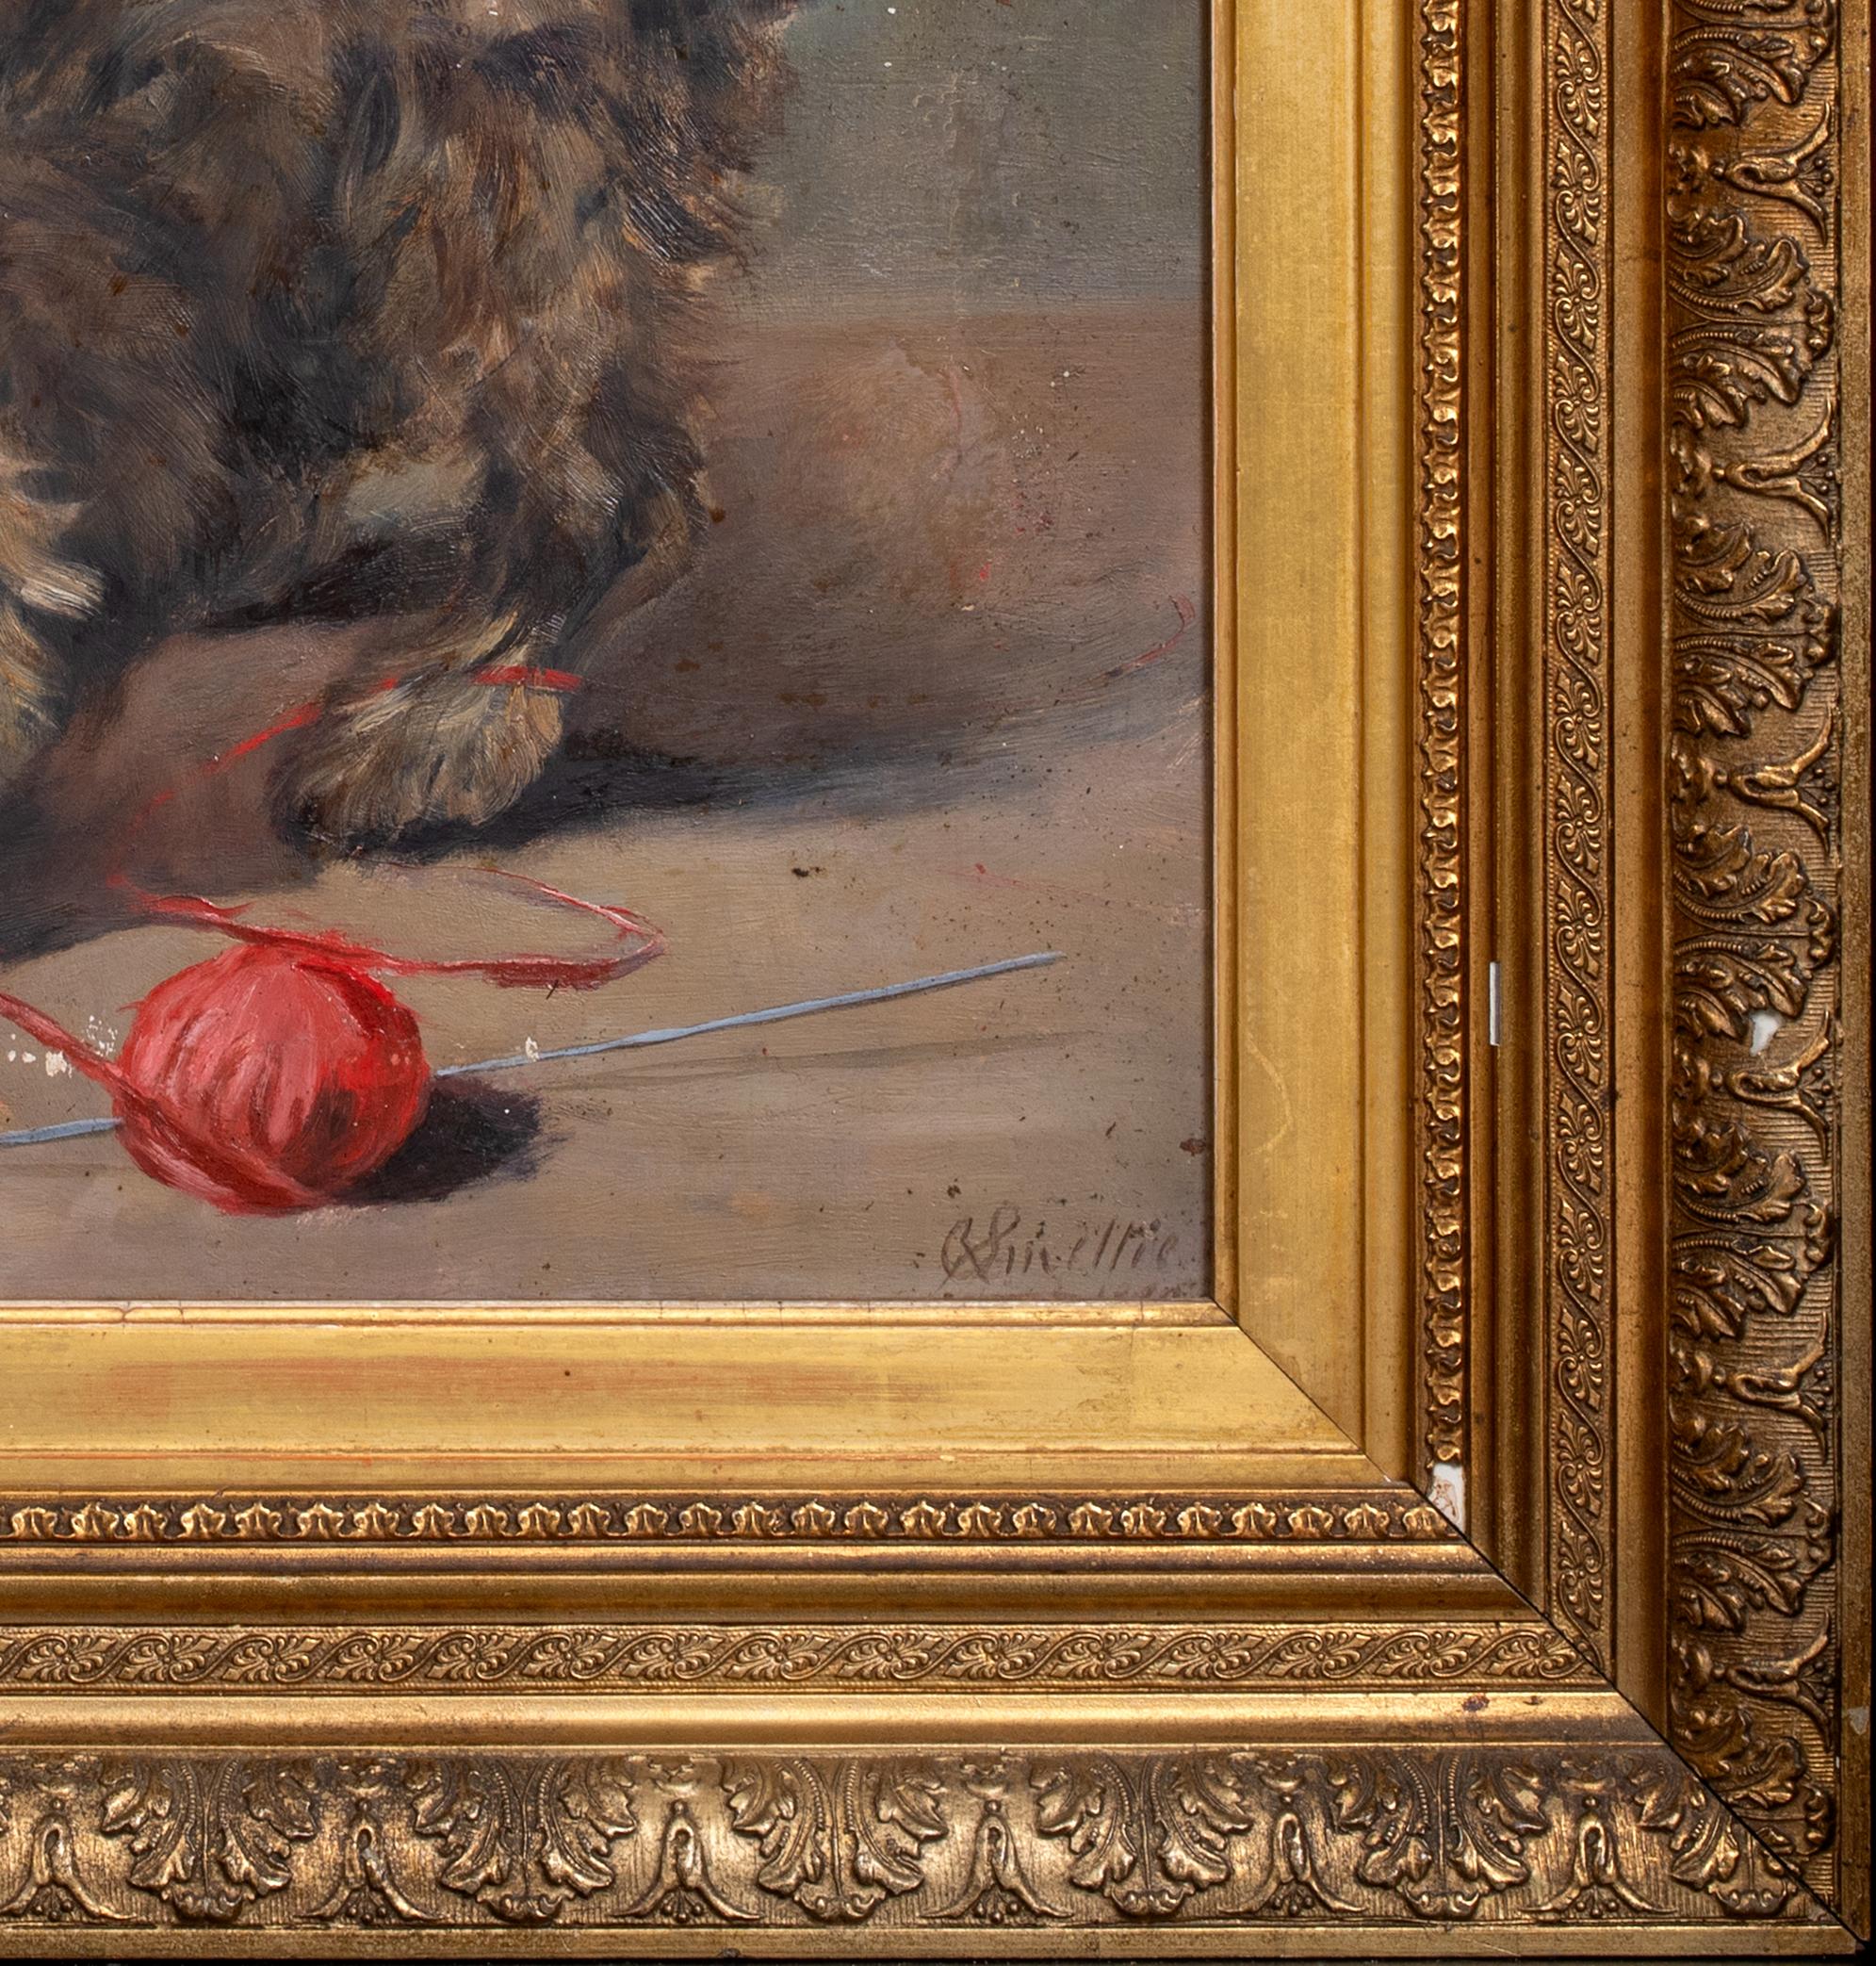 Portrait Of A Cairn Terrier Puppy Playing, 19th Century

by Robert Smellie (1850-1908)

19th Century Portrait of a Cairn Terrier puppy, oil on canvas by Robert Smellie. Excellent quality and condition example of the artists work. Some minor surface